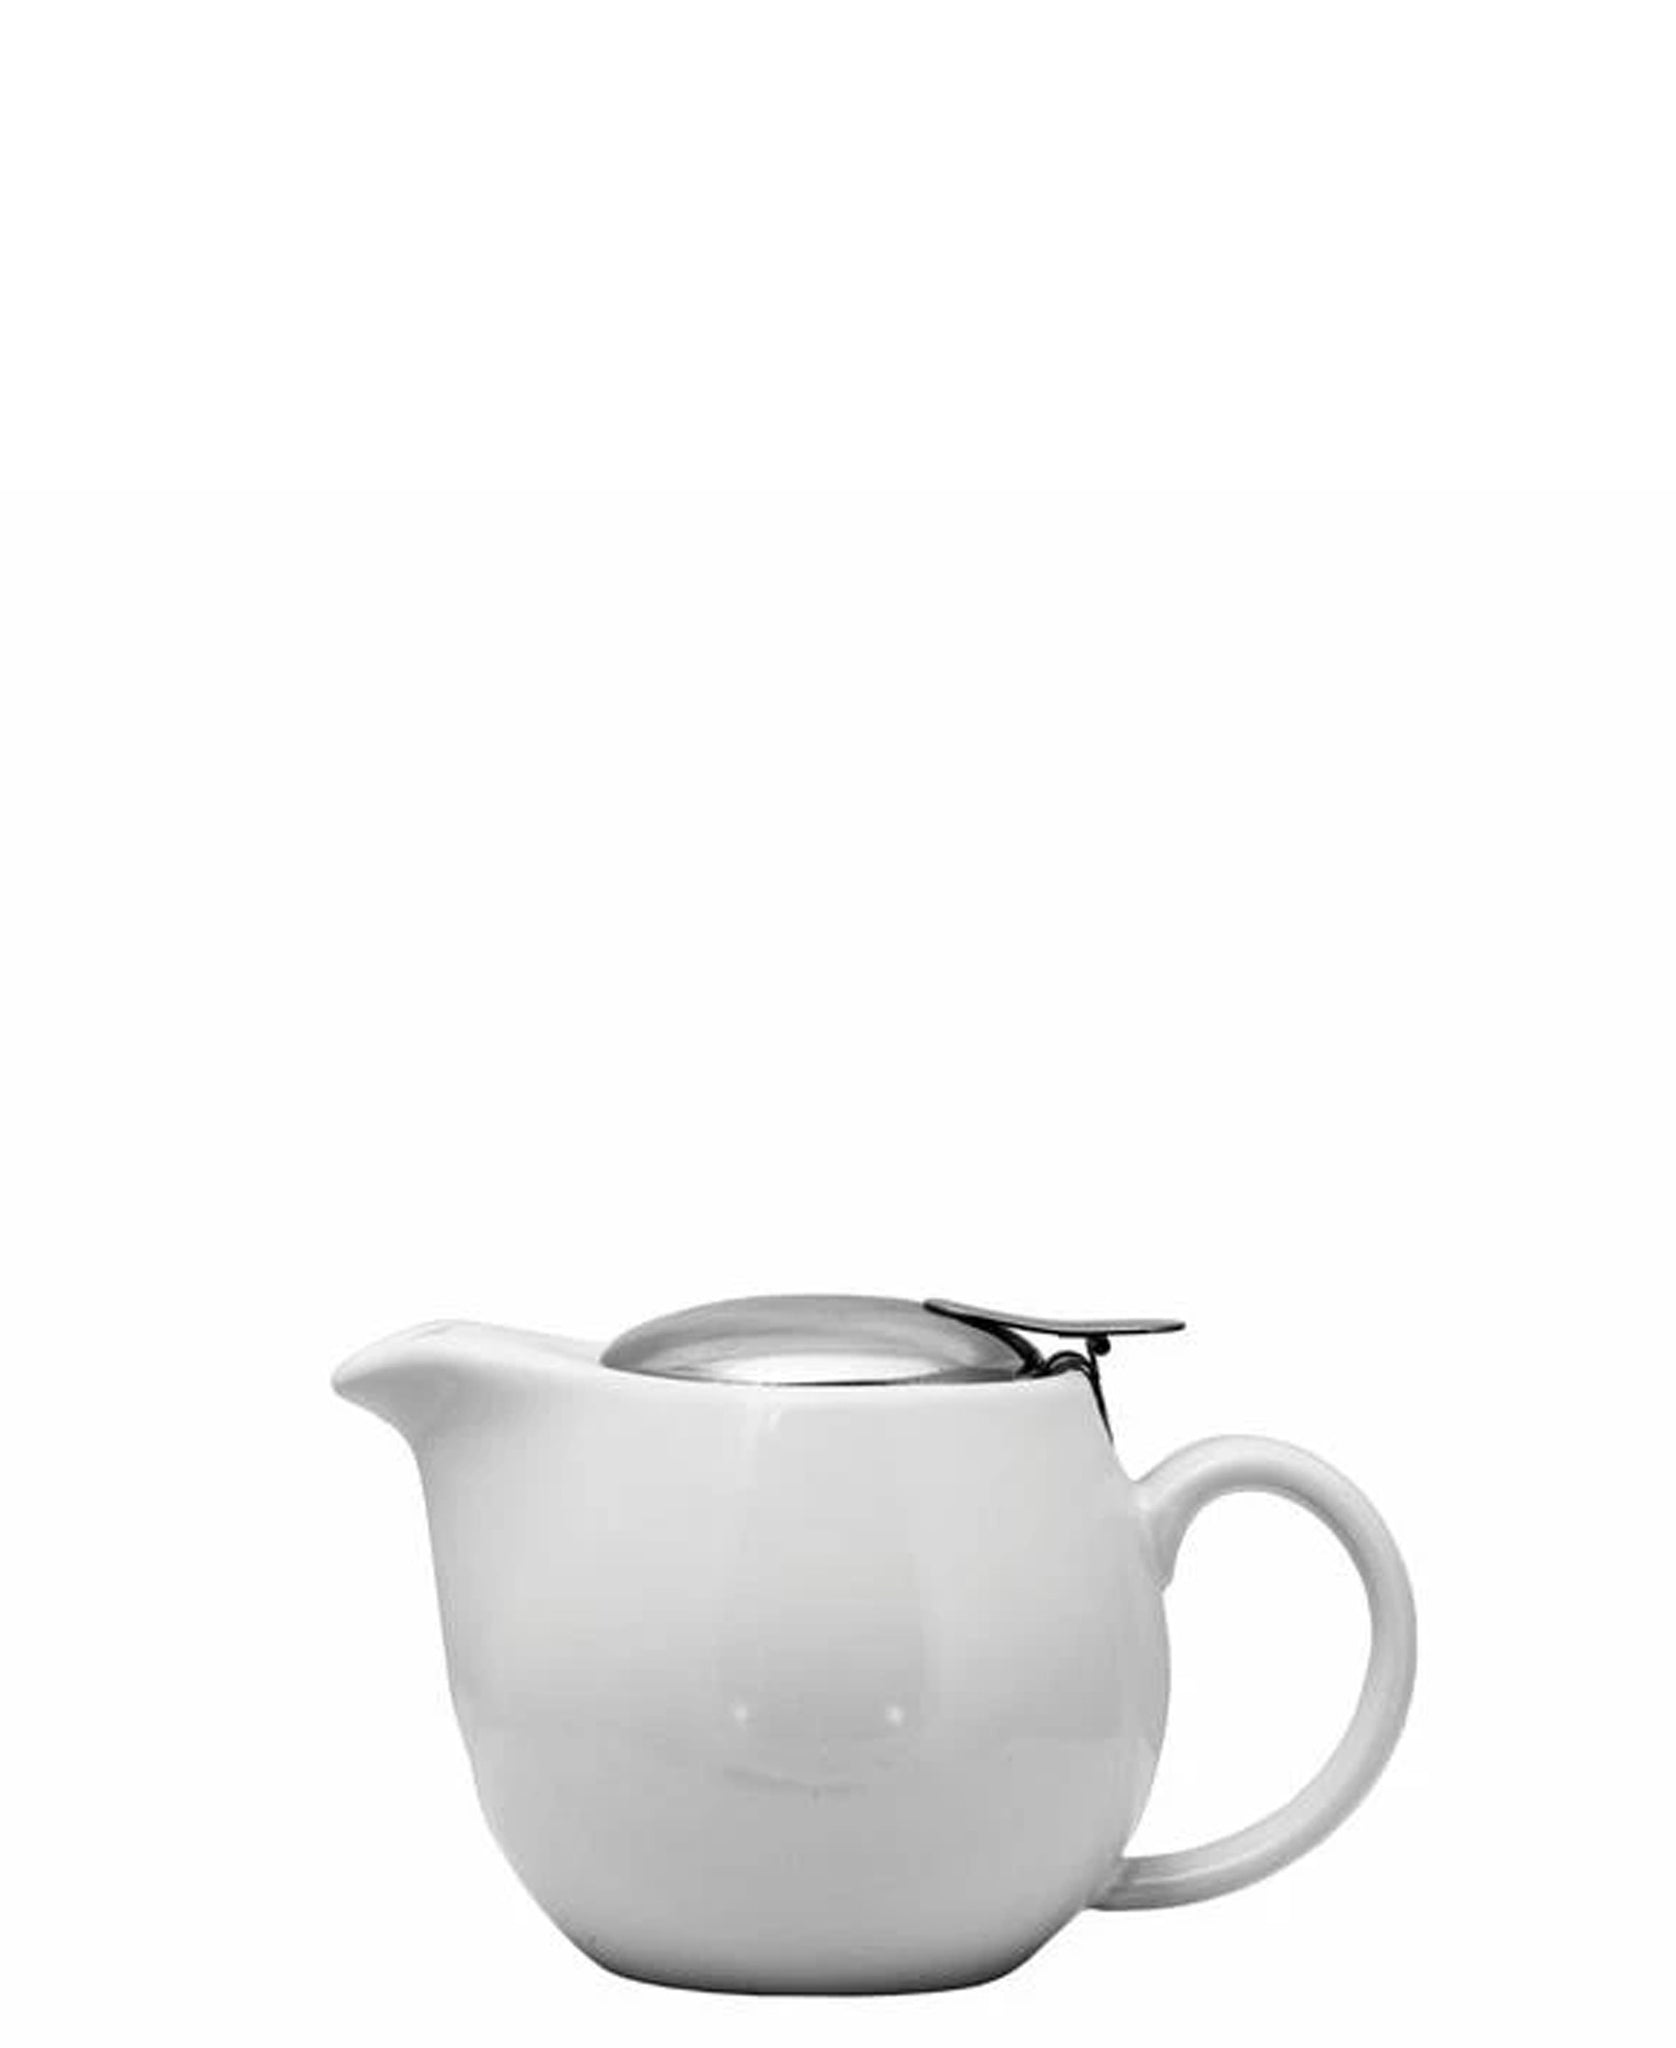 Regent Stoneware 400ml Teapot With Stainless Steel Lid & Infuser - Gloss White